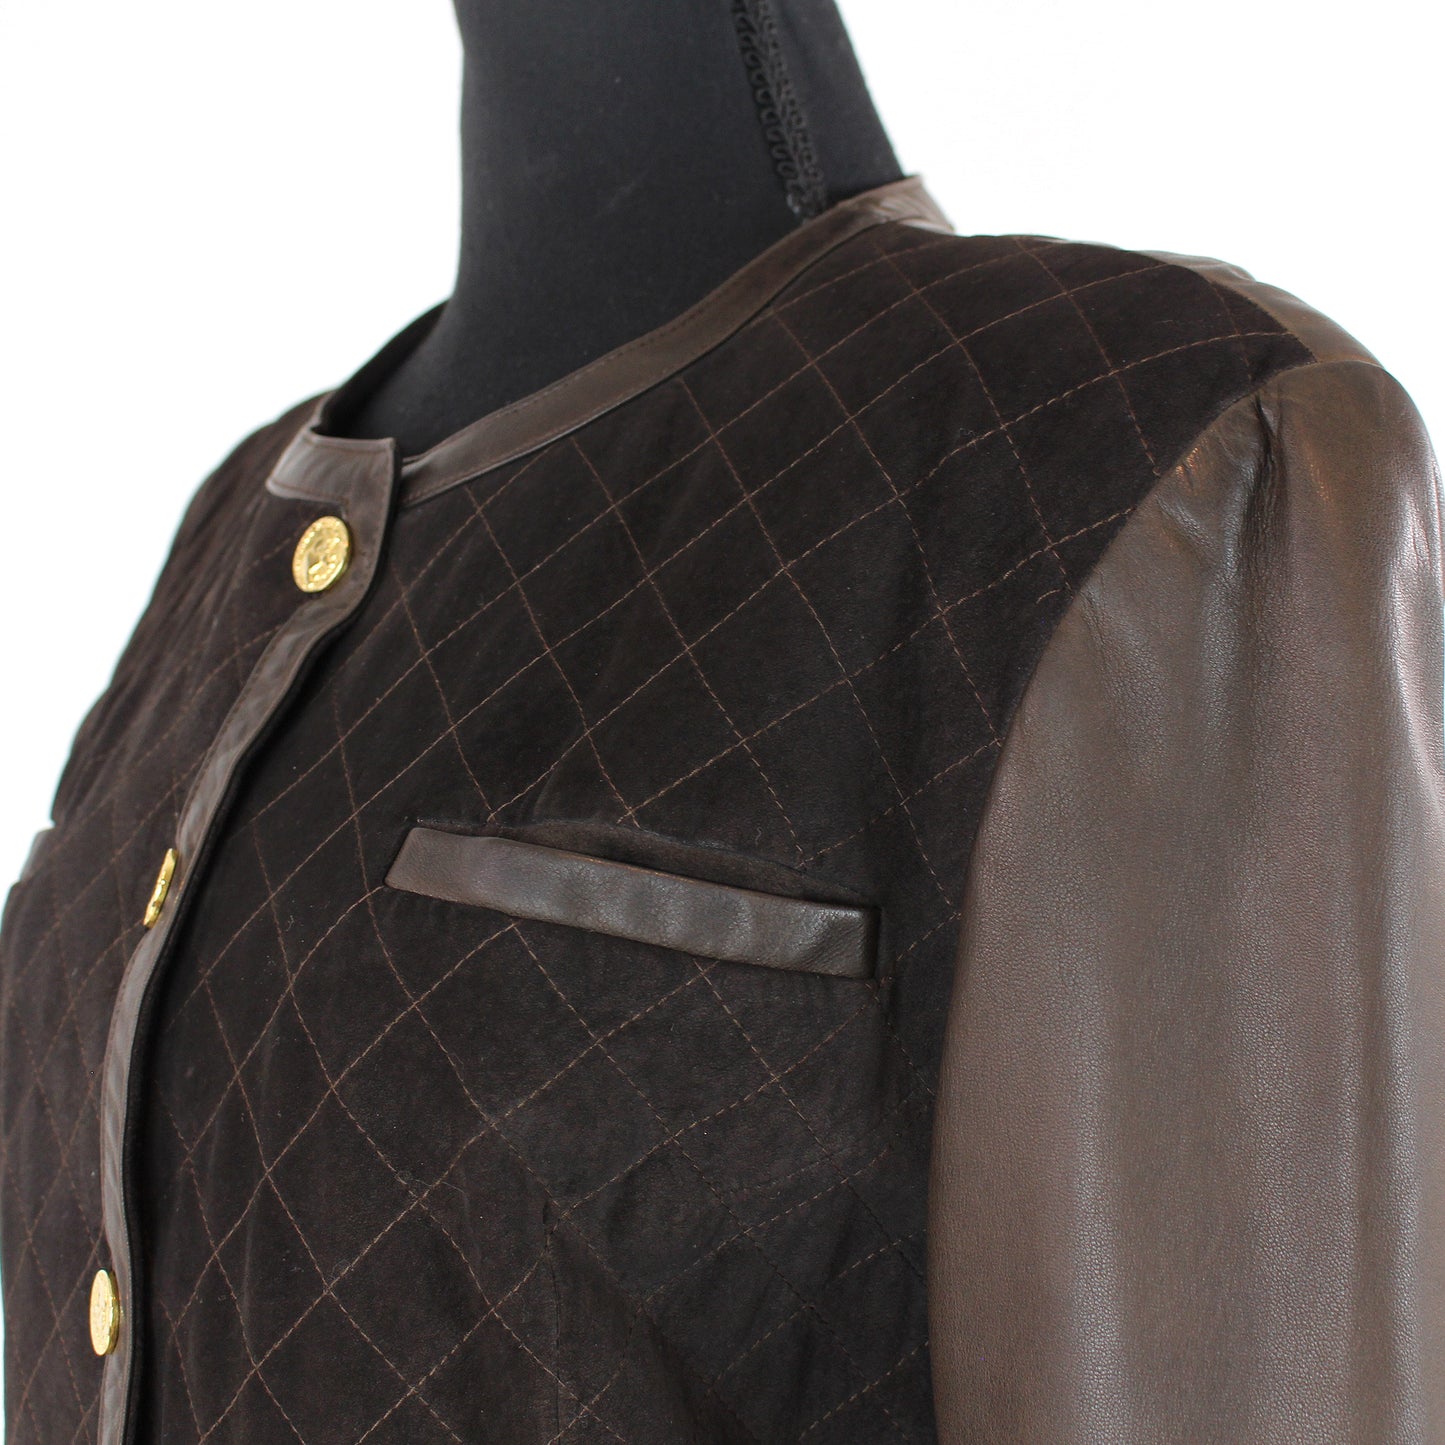 Chanel Suede Quilted Leather Jacket